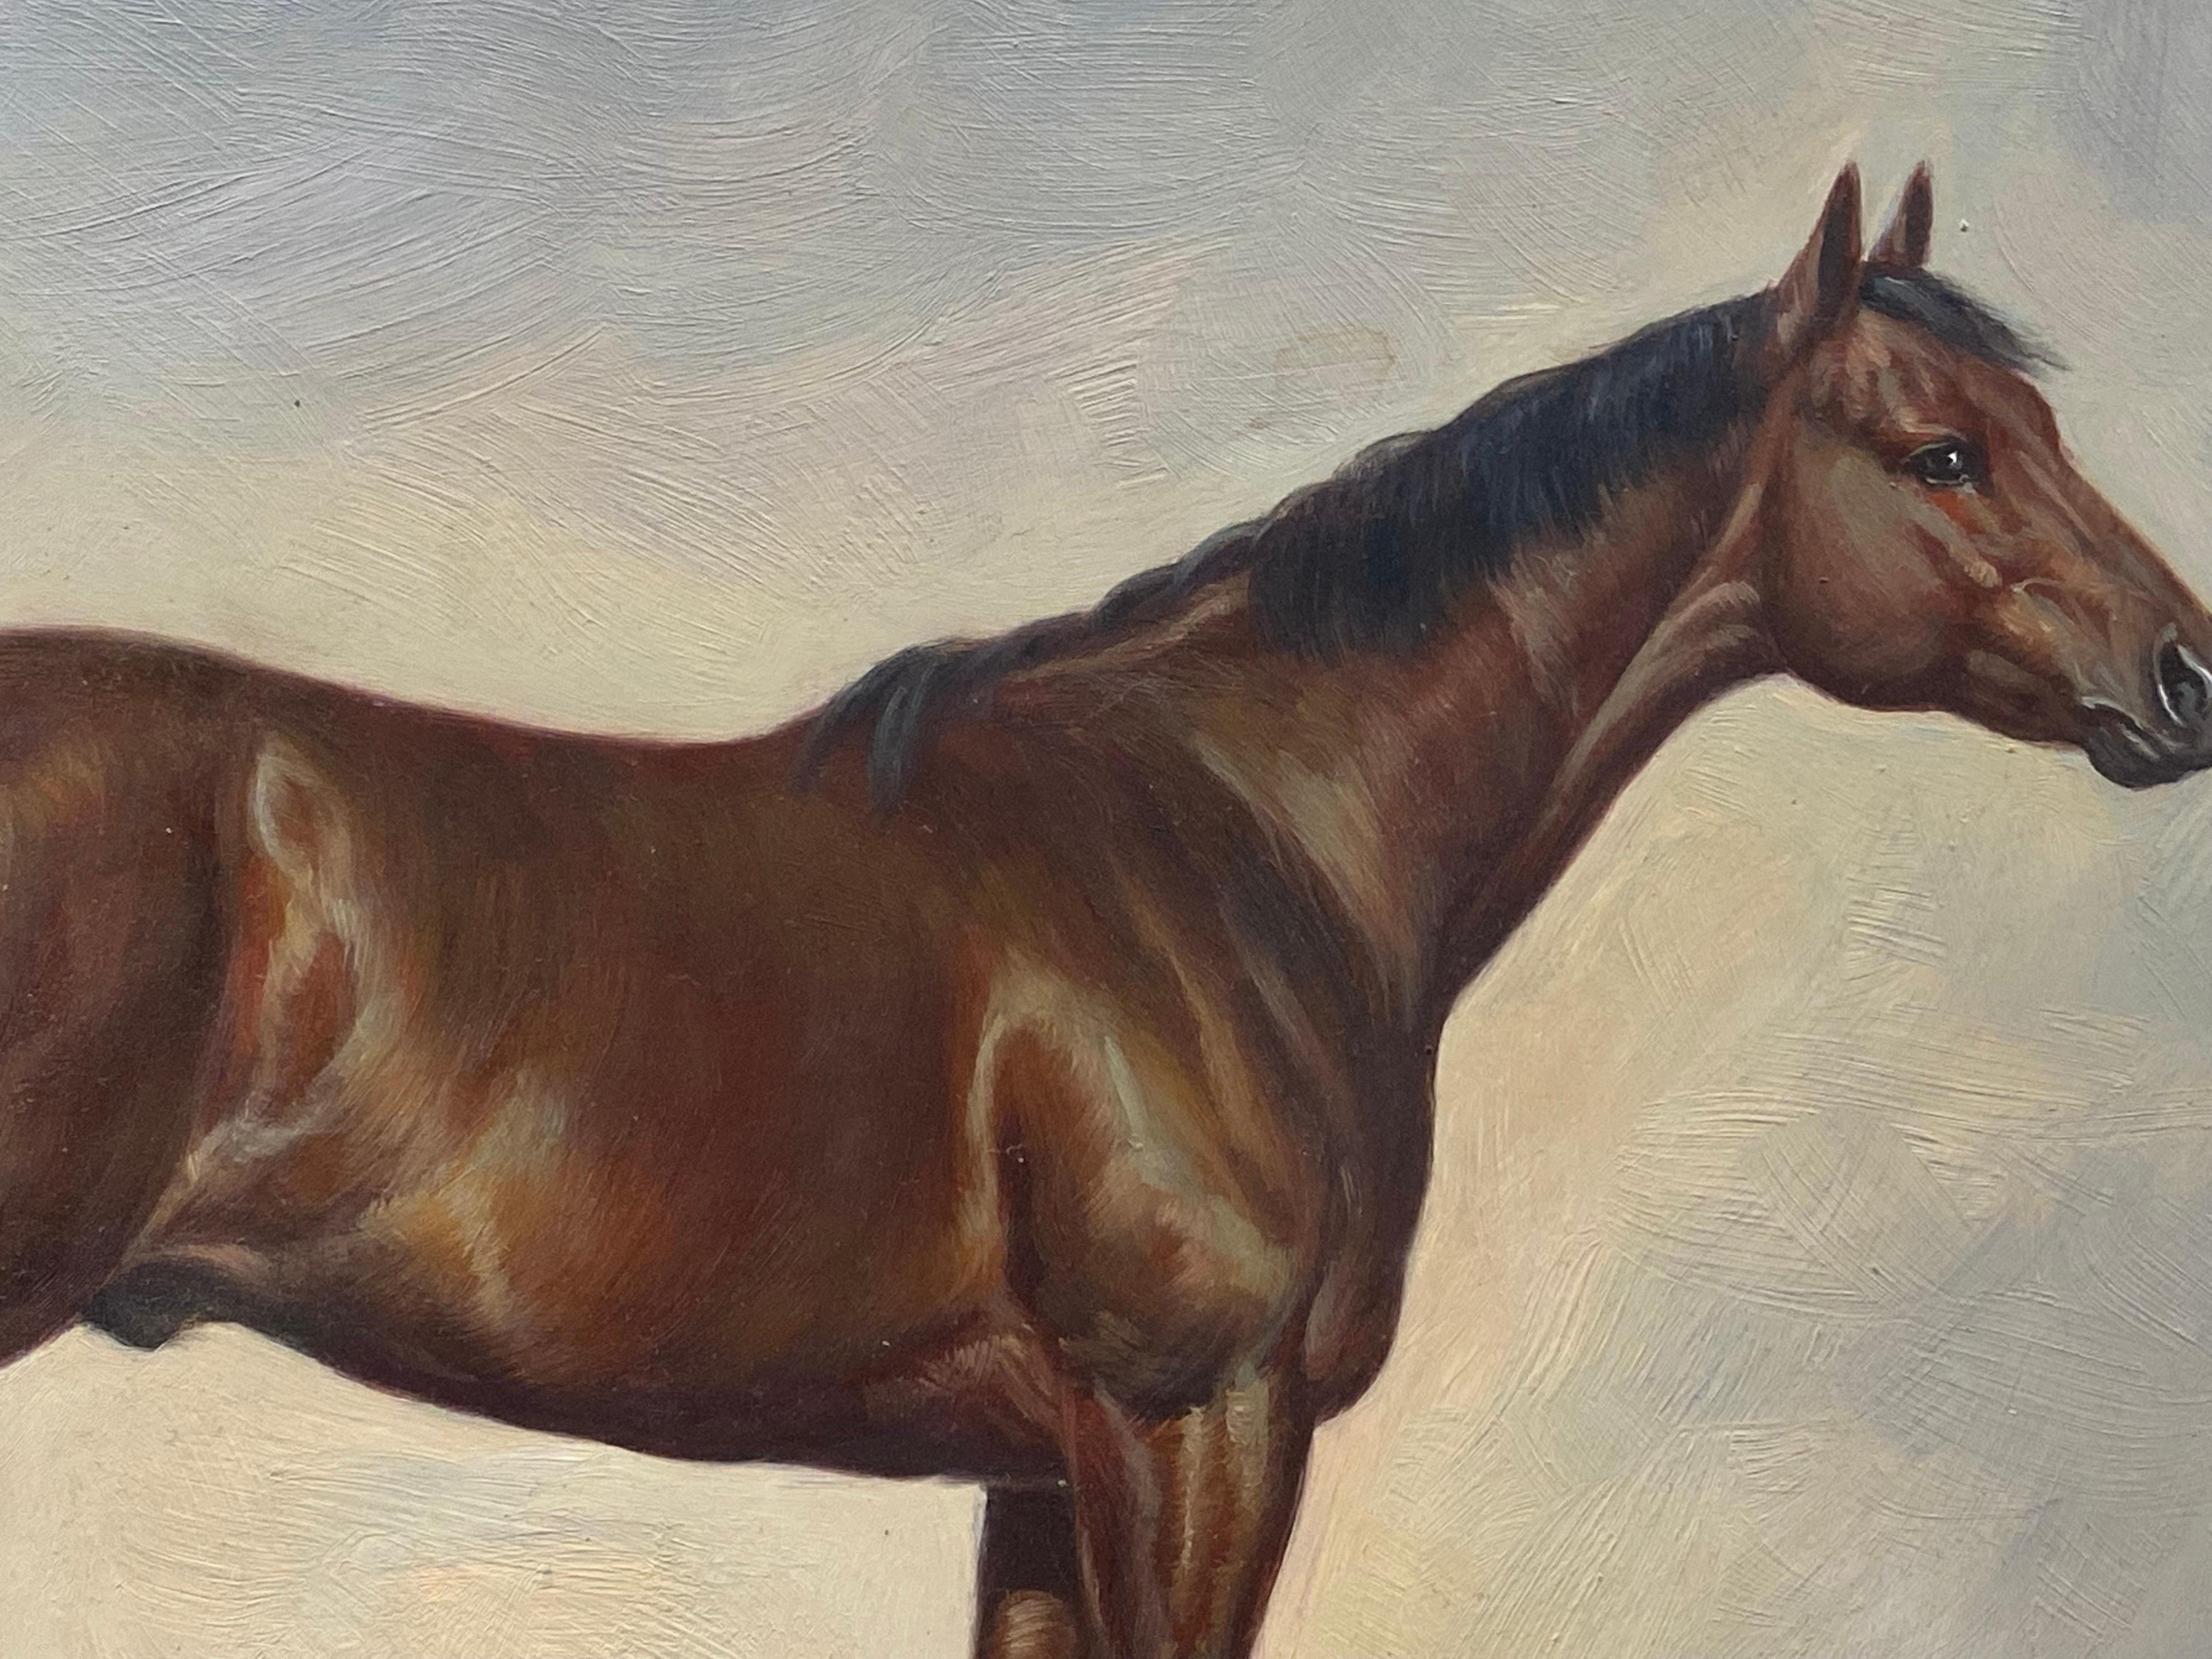 Portrait of a Horse
British School, 20th century
oil painting on panel, unframed
paintings size: 8 x 10 inches
condition: excellent
provenance: from a private collection here in England

A very fine equestrian portrait of this horse. Painted with